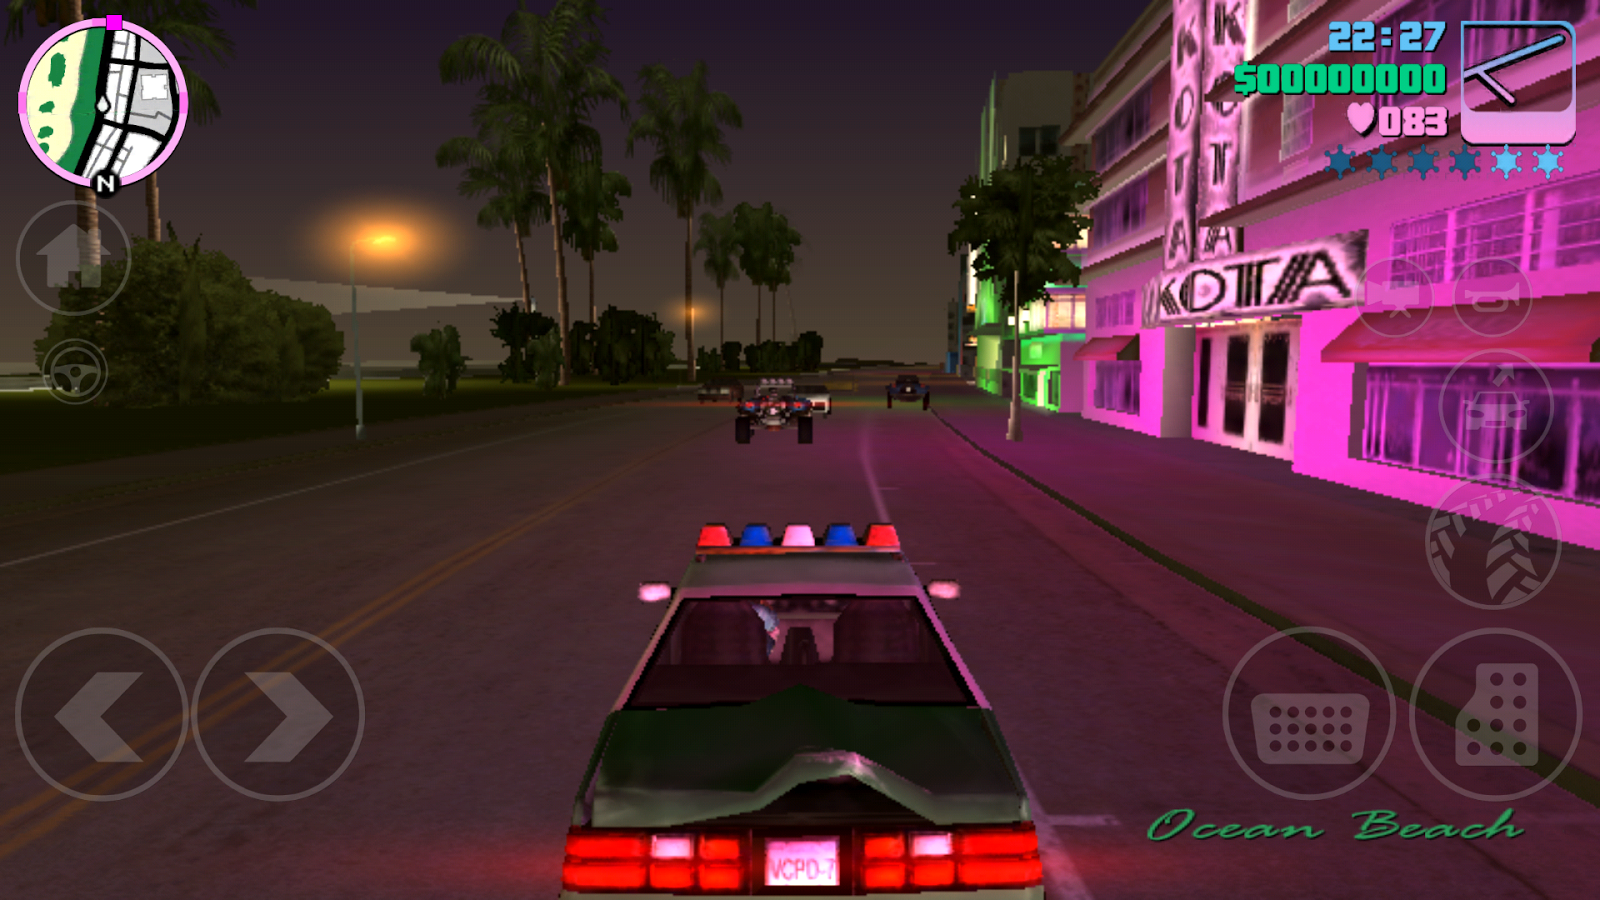 Gta 6 game free download for android mobile download